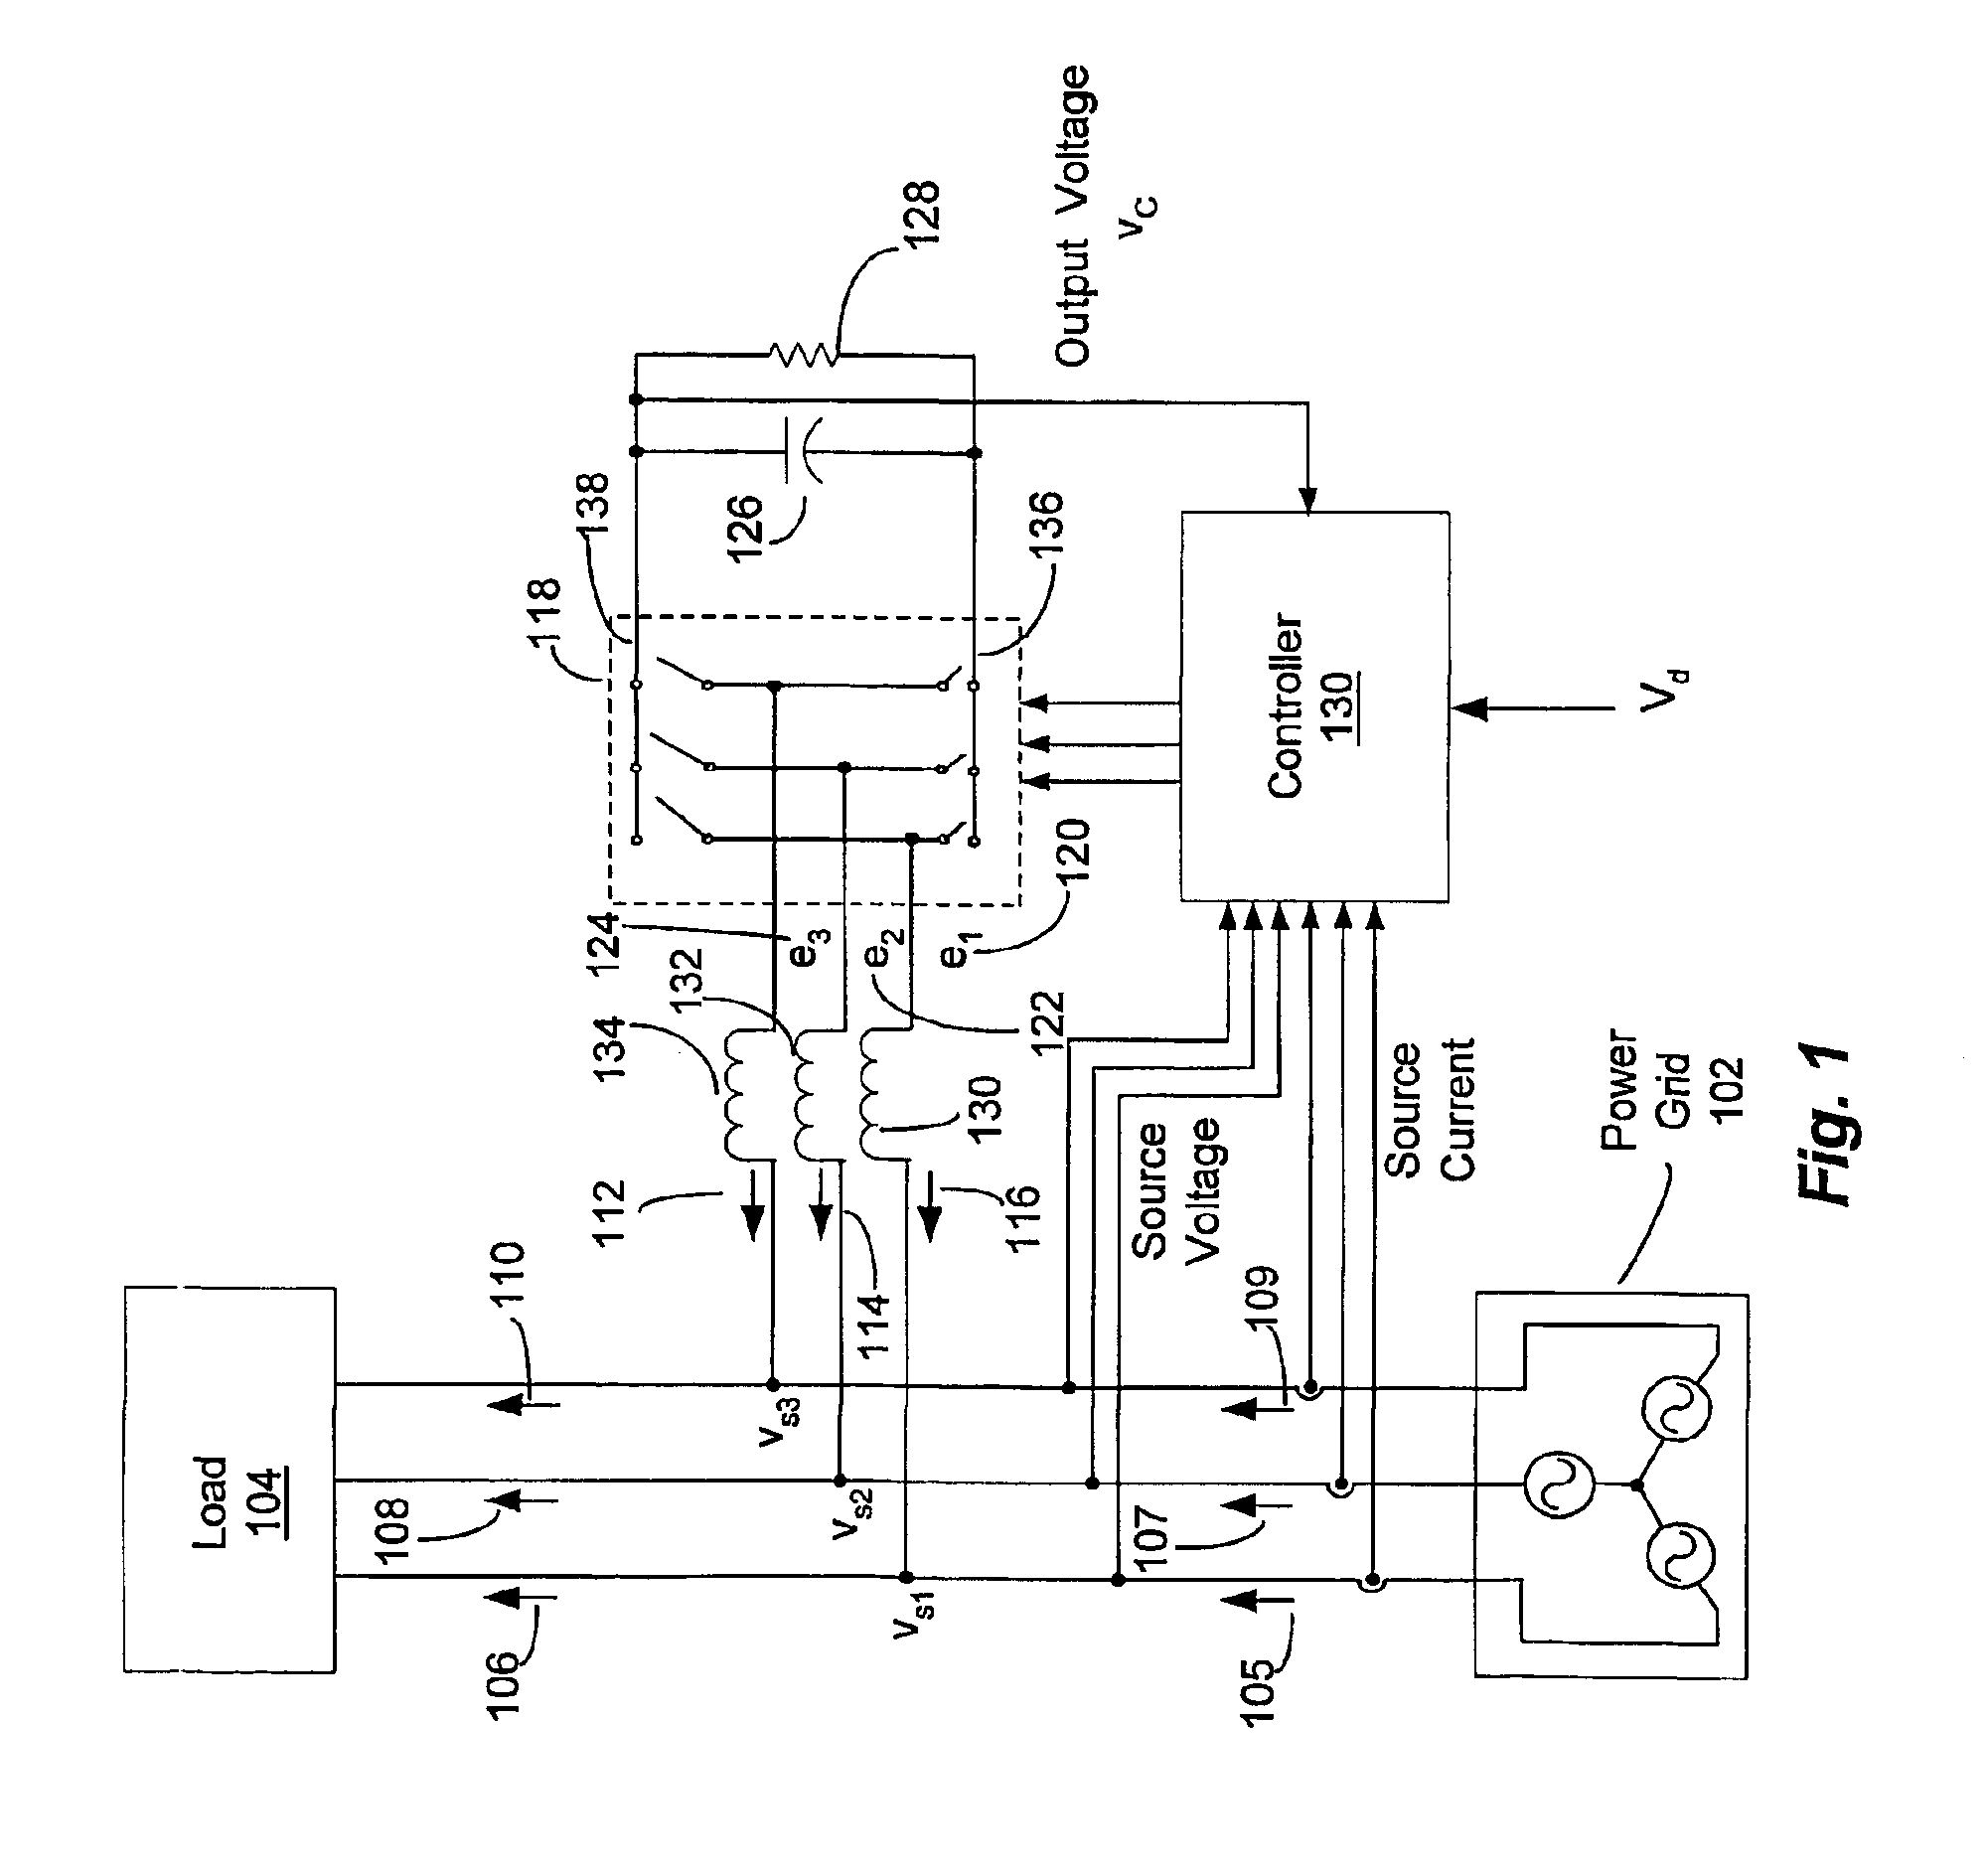 Adaptive controller for d-statcom in the stationary reference frame to compensate for reactive and harmonic distortion under unbalanced conditions